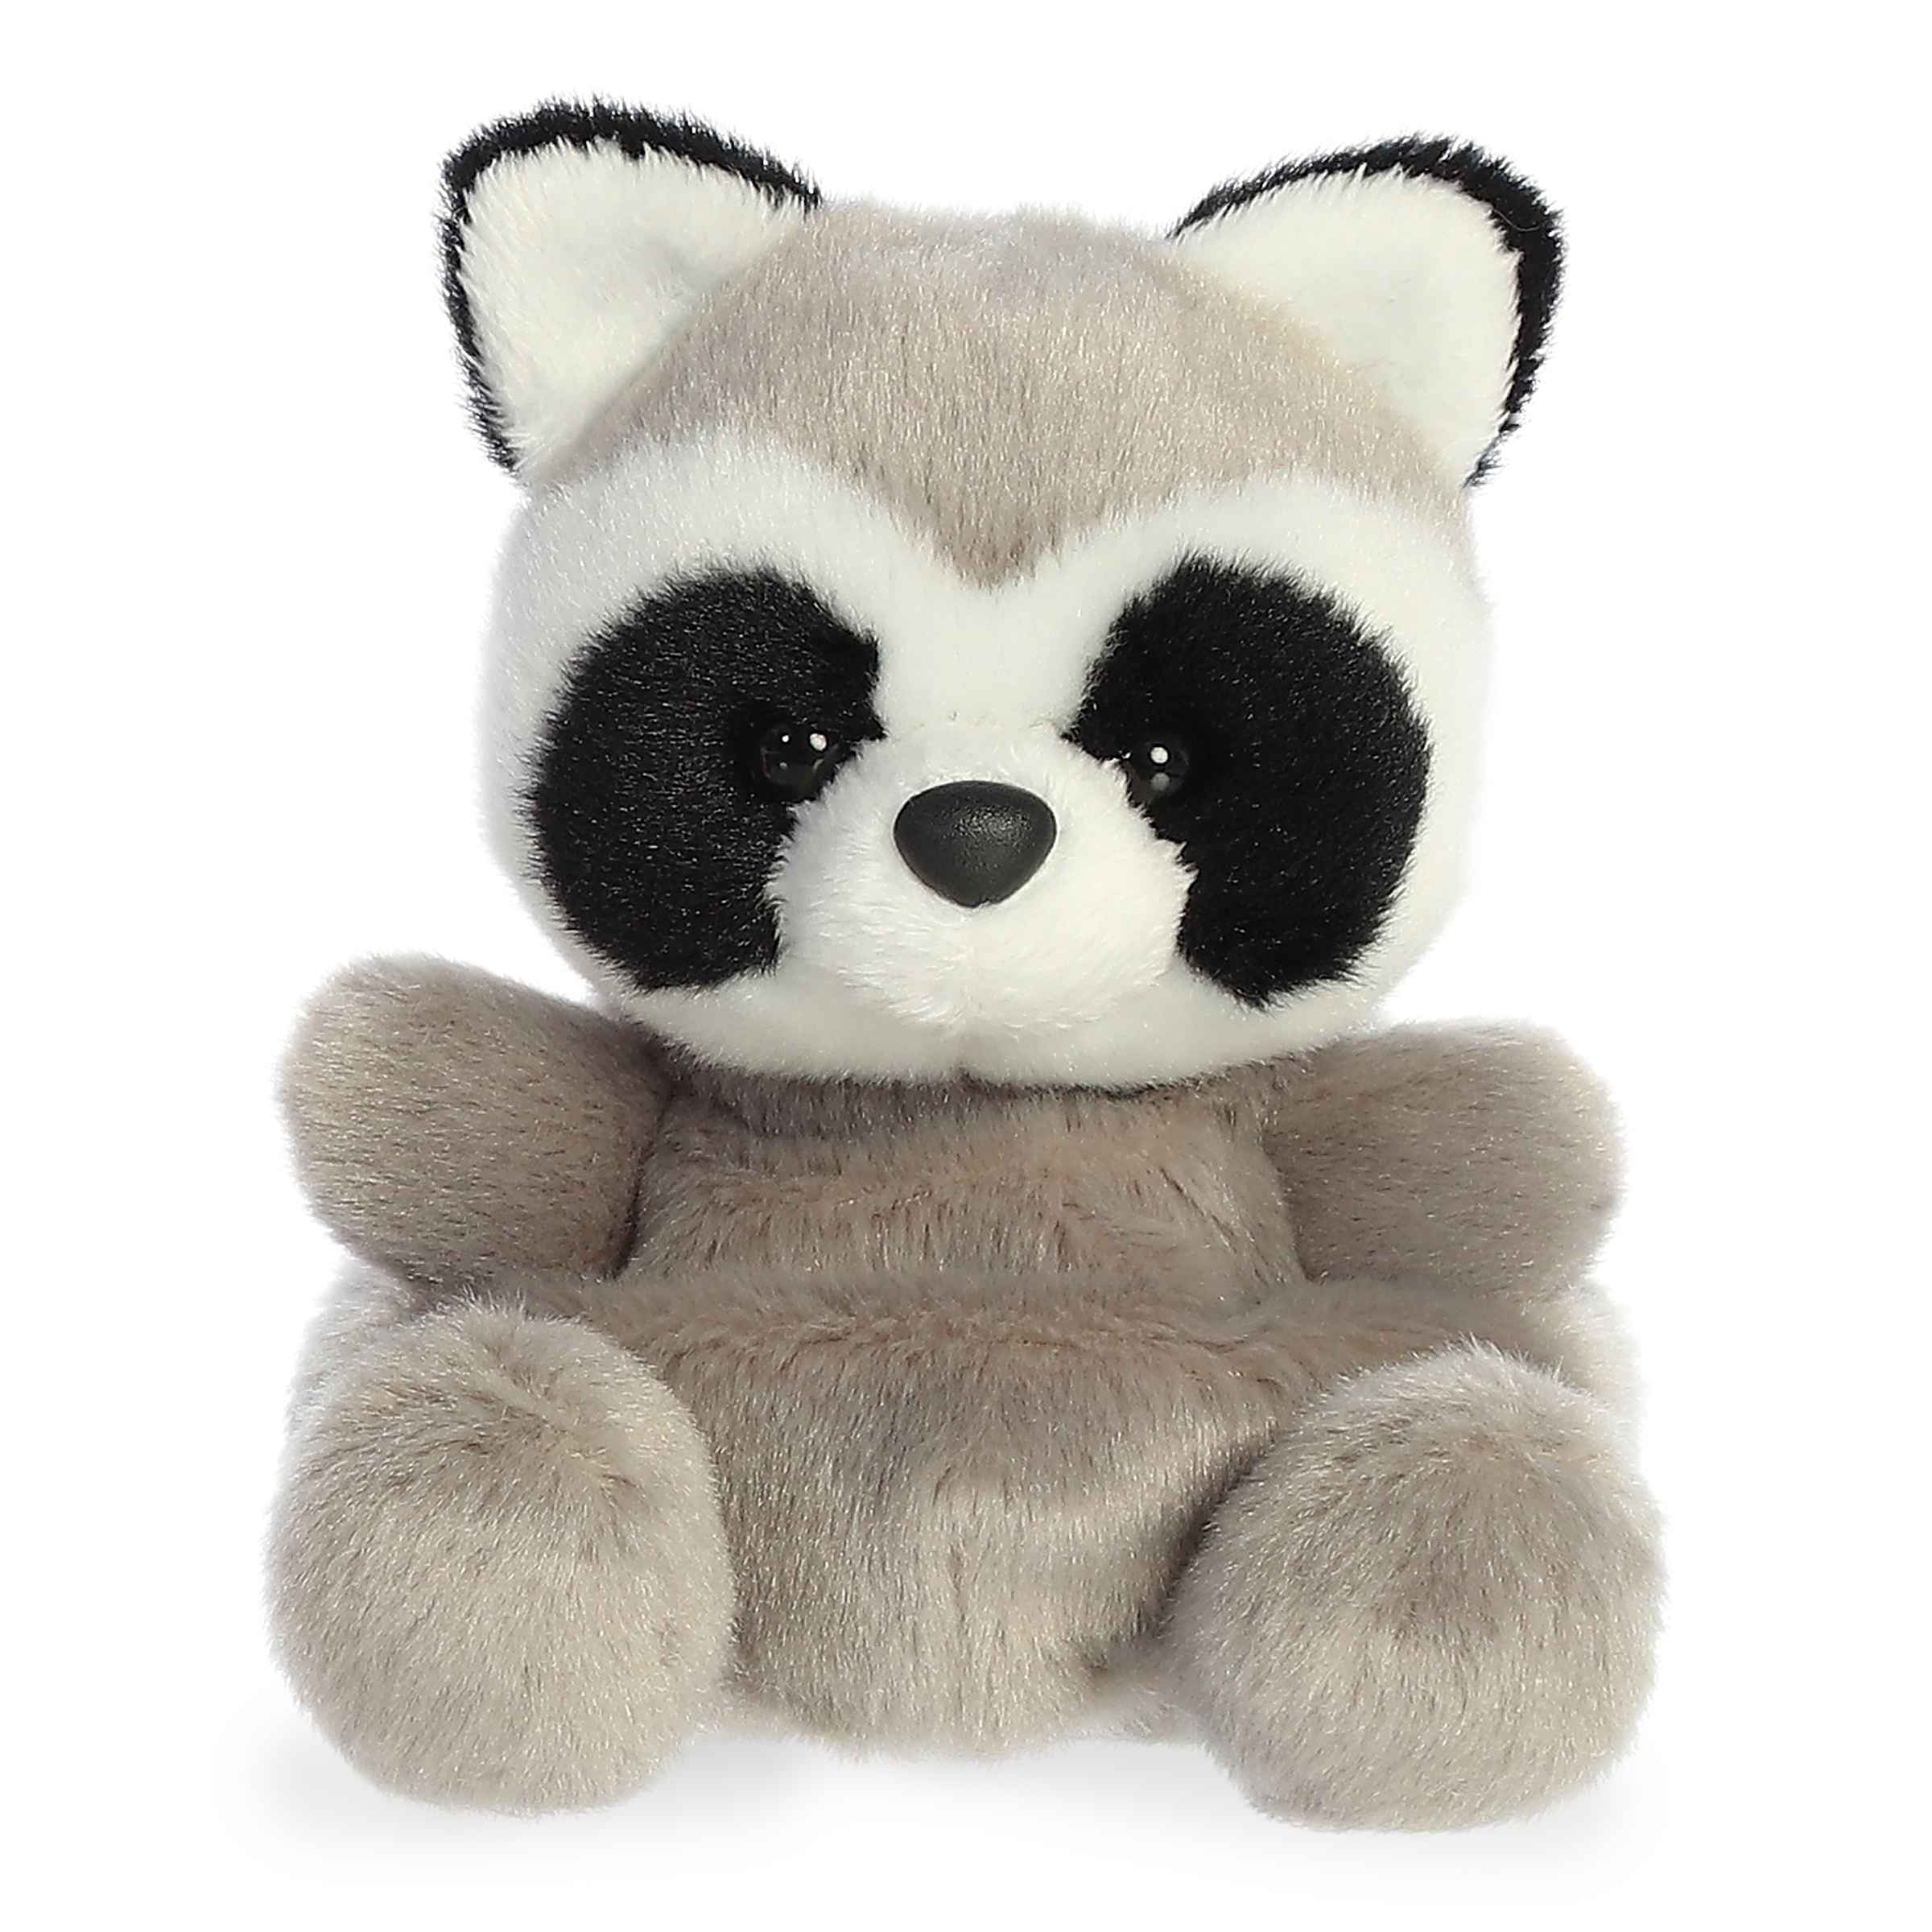 Rascal Raccoon plush from Palm Pals, black and white plush raccoon, mischievous and soft